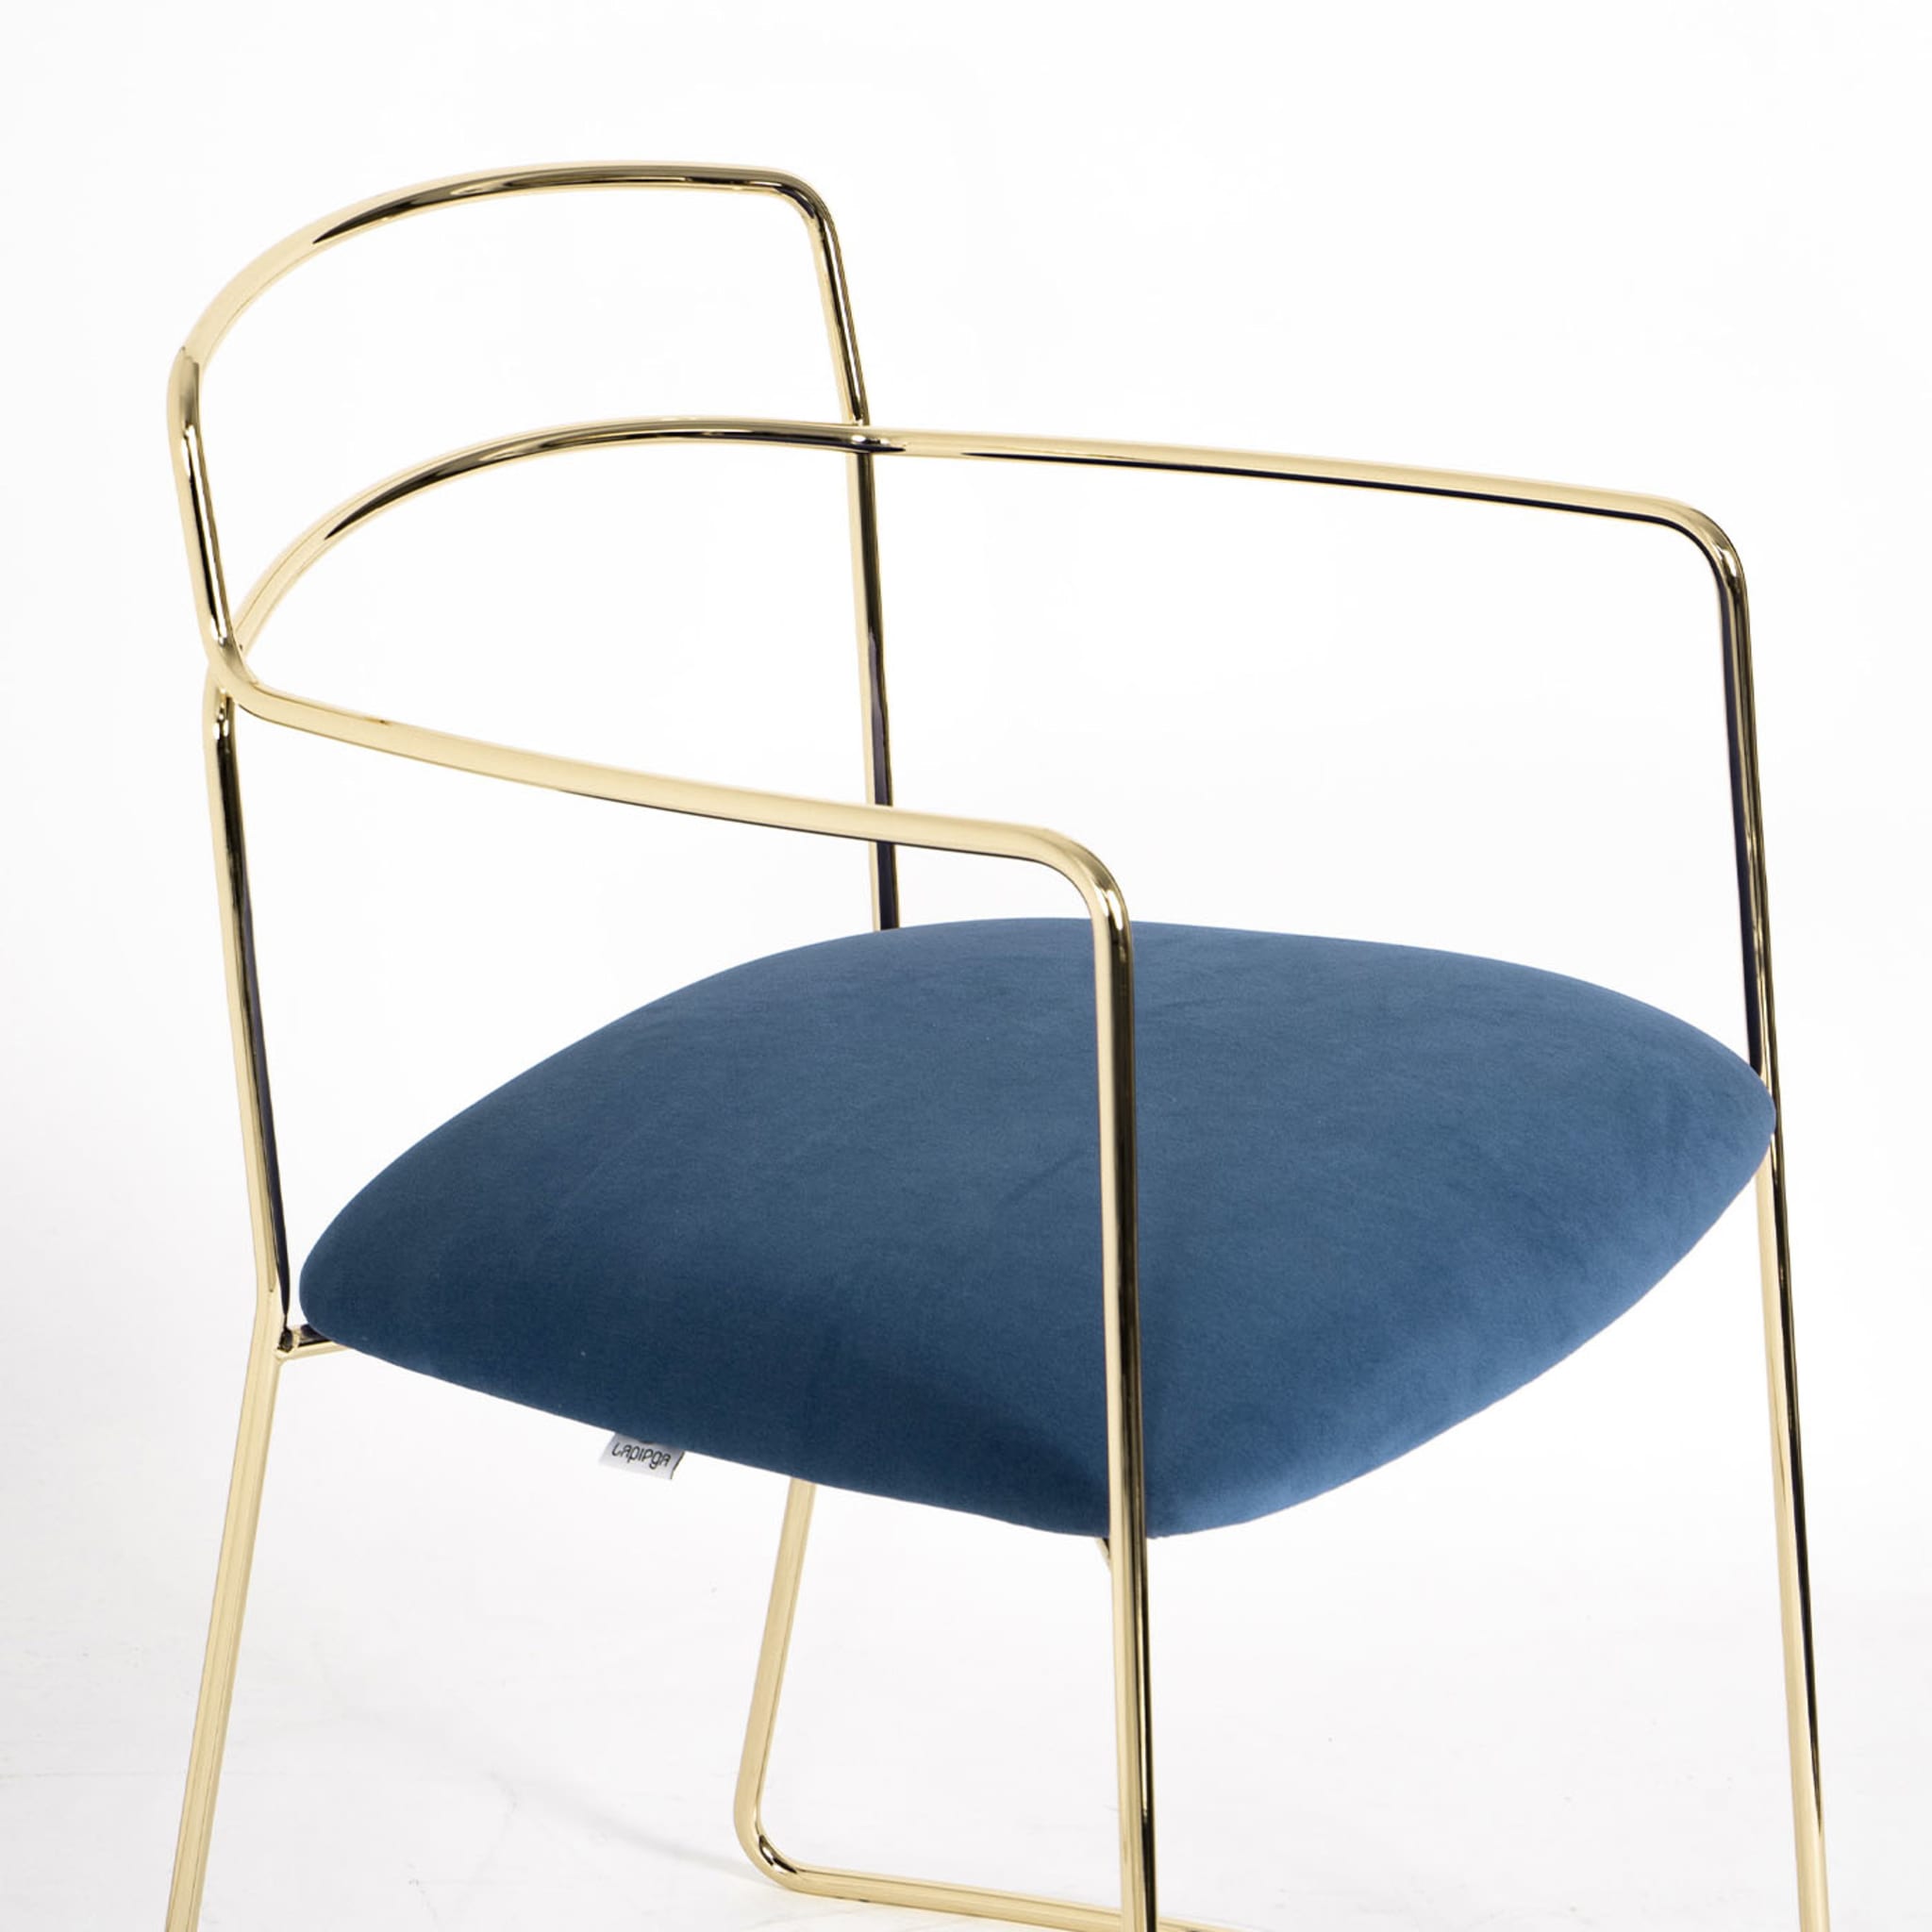 Seidecimi Gold Chair With Armrests - Alternative view 3